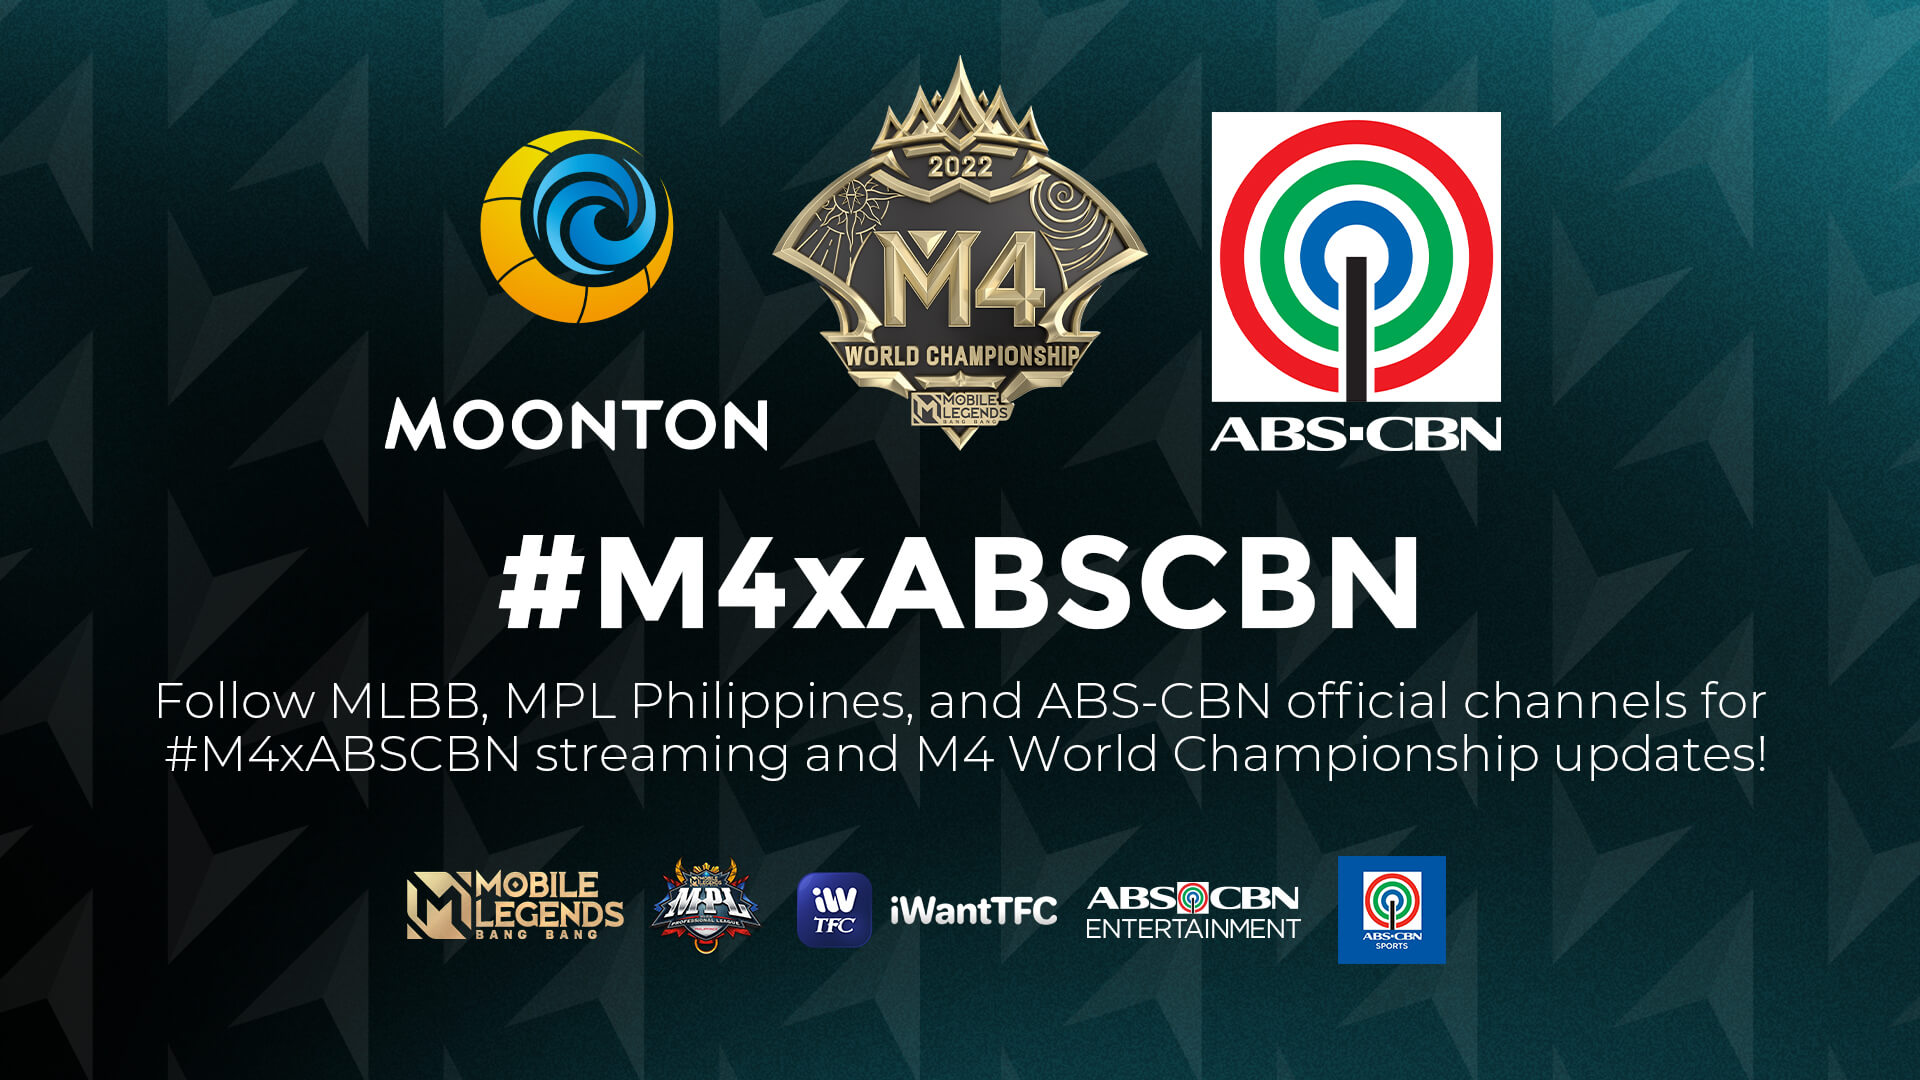 MLBB M4 World Championship will be aired on ABS-CBN network.